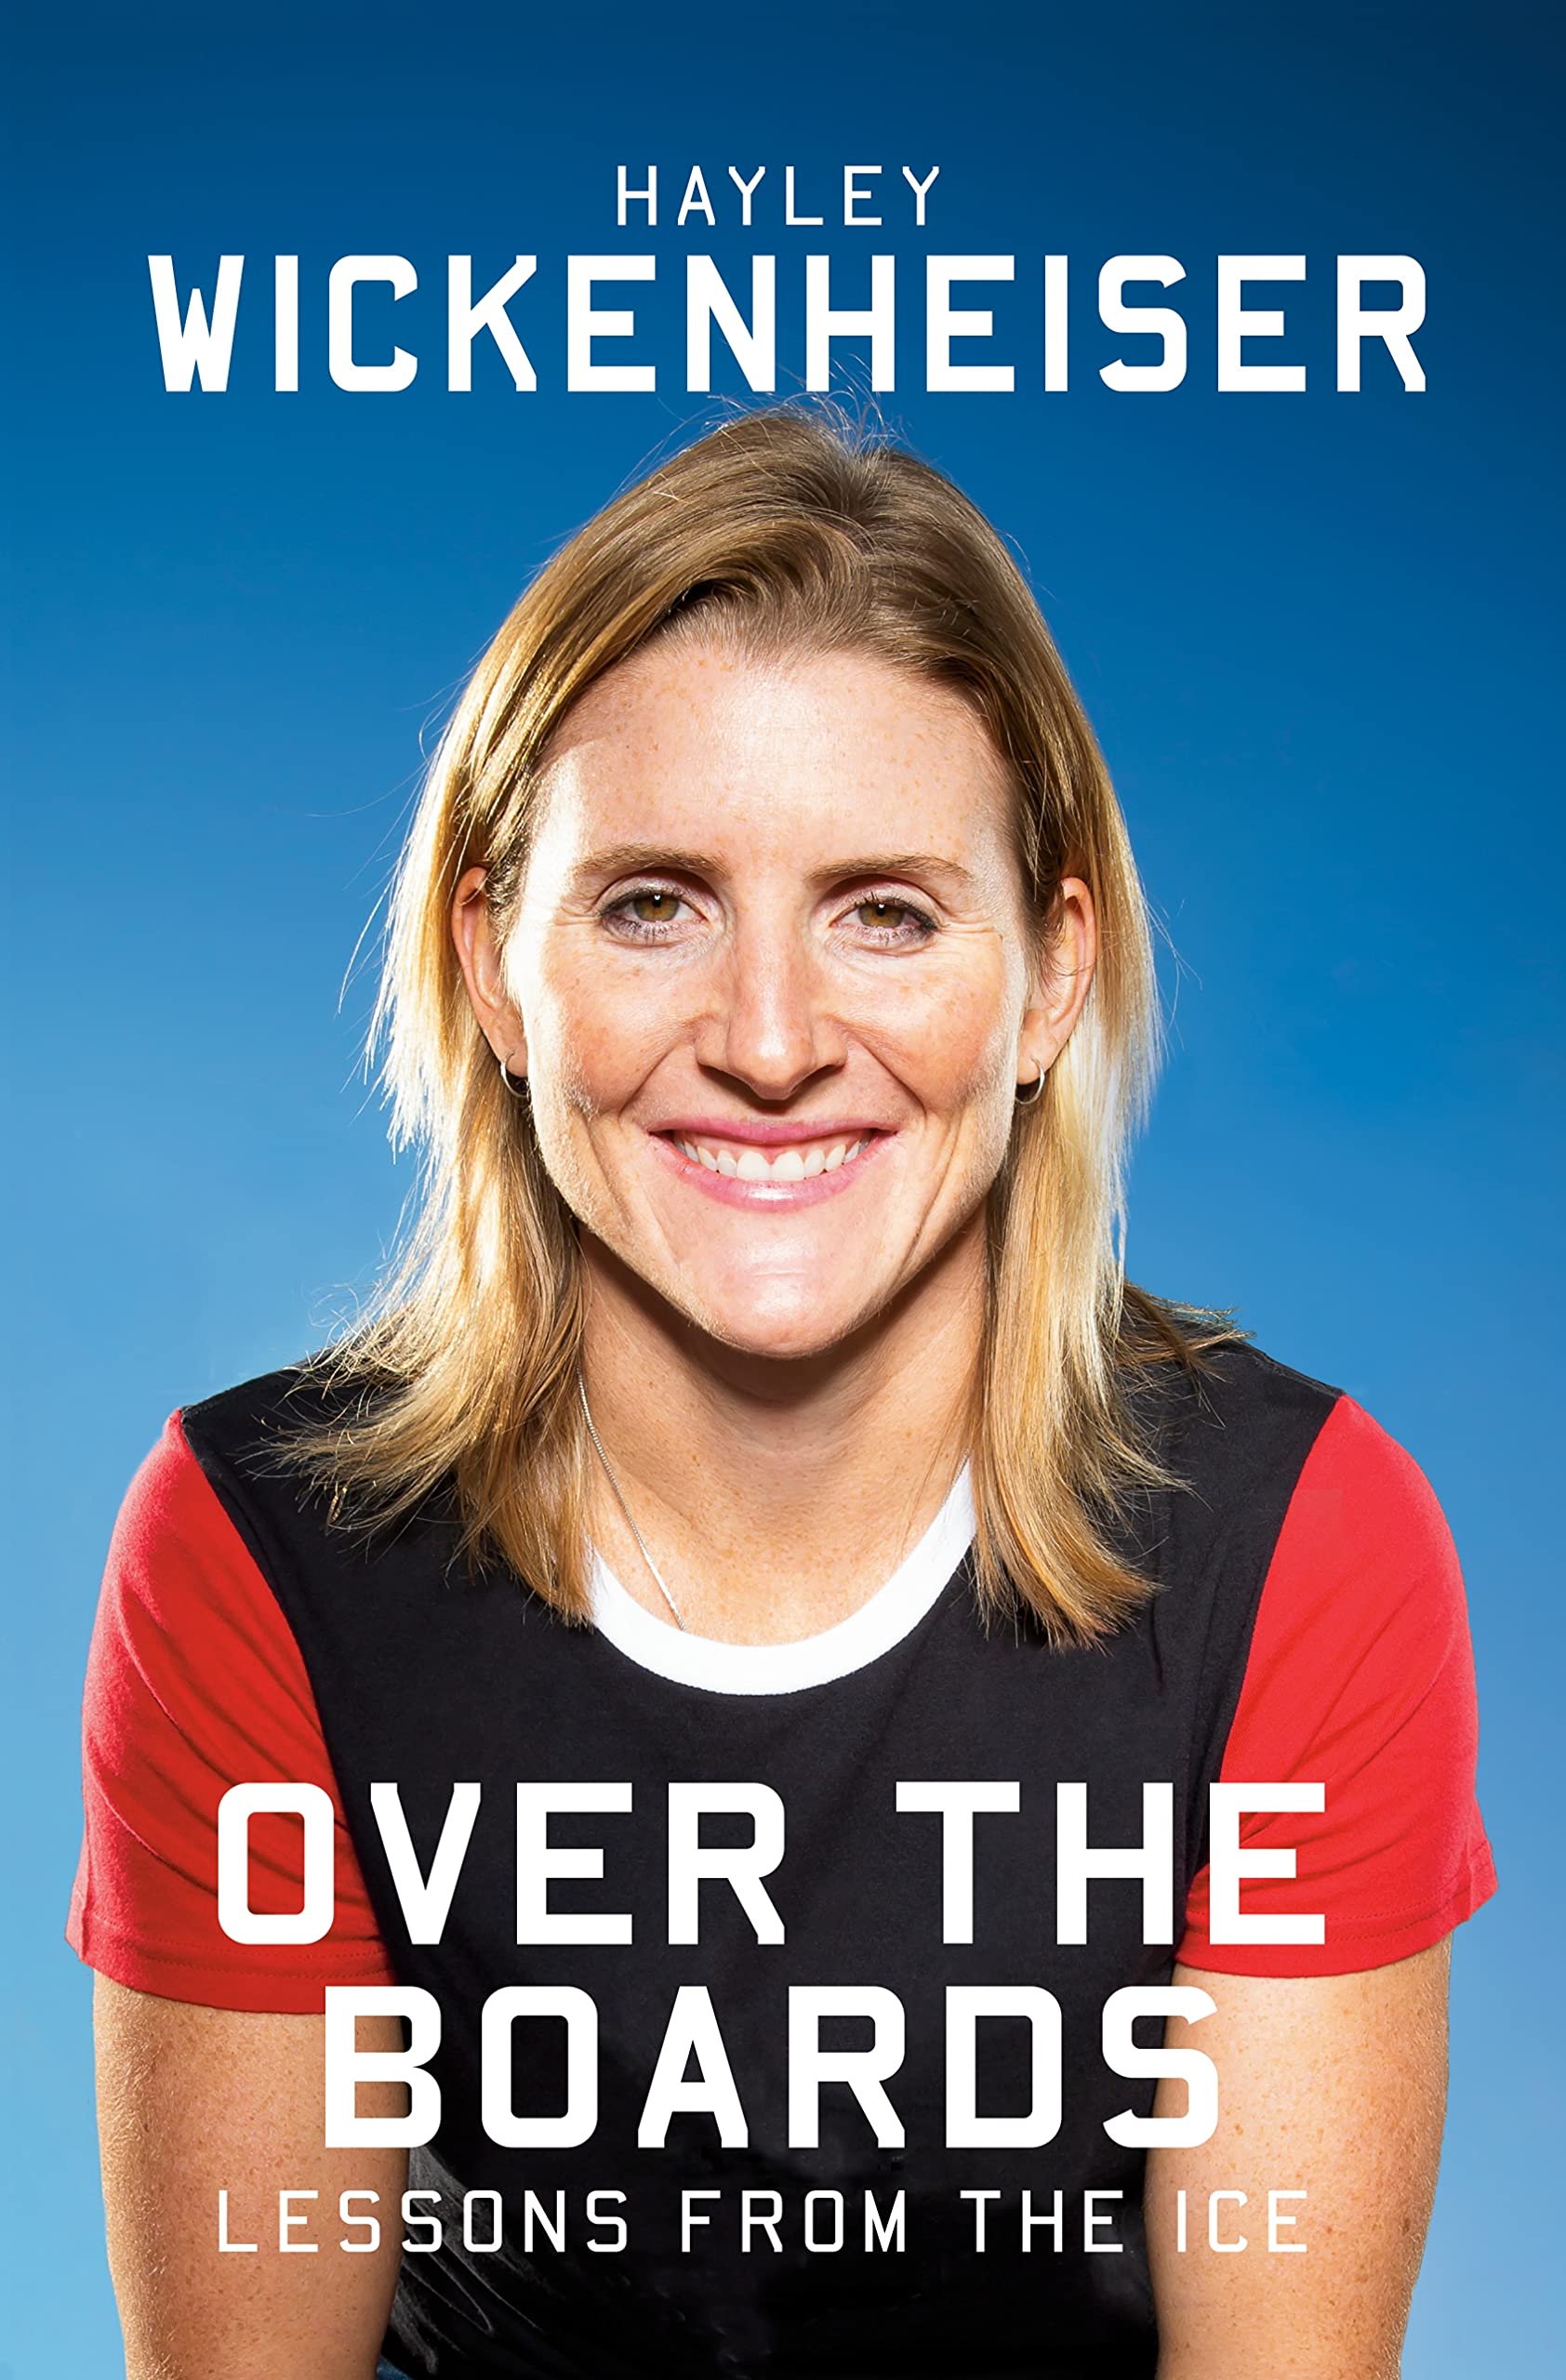 Over the Boards: Lessons from the Ice Hardcover by Hayley Wickenheiser